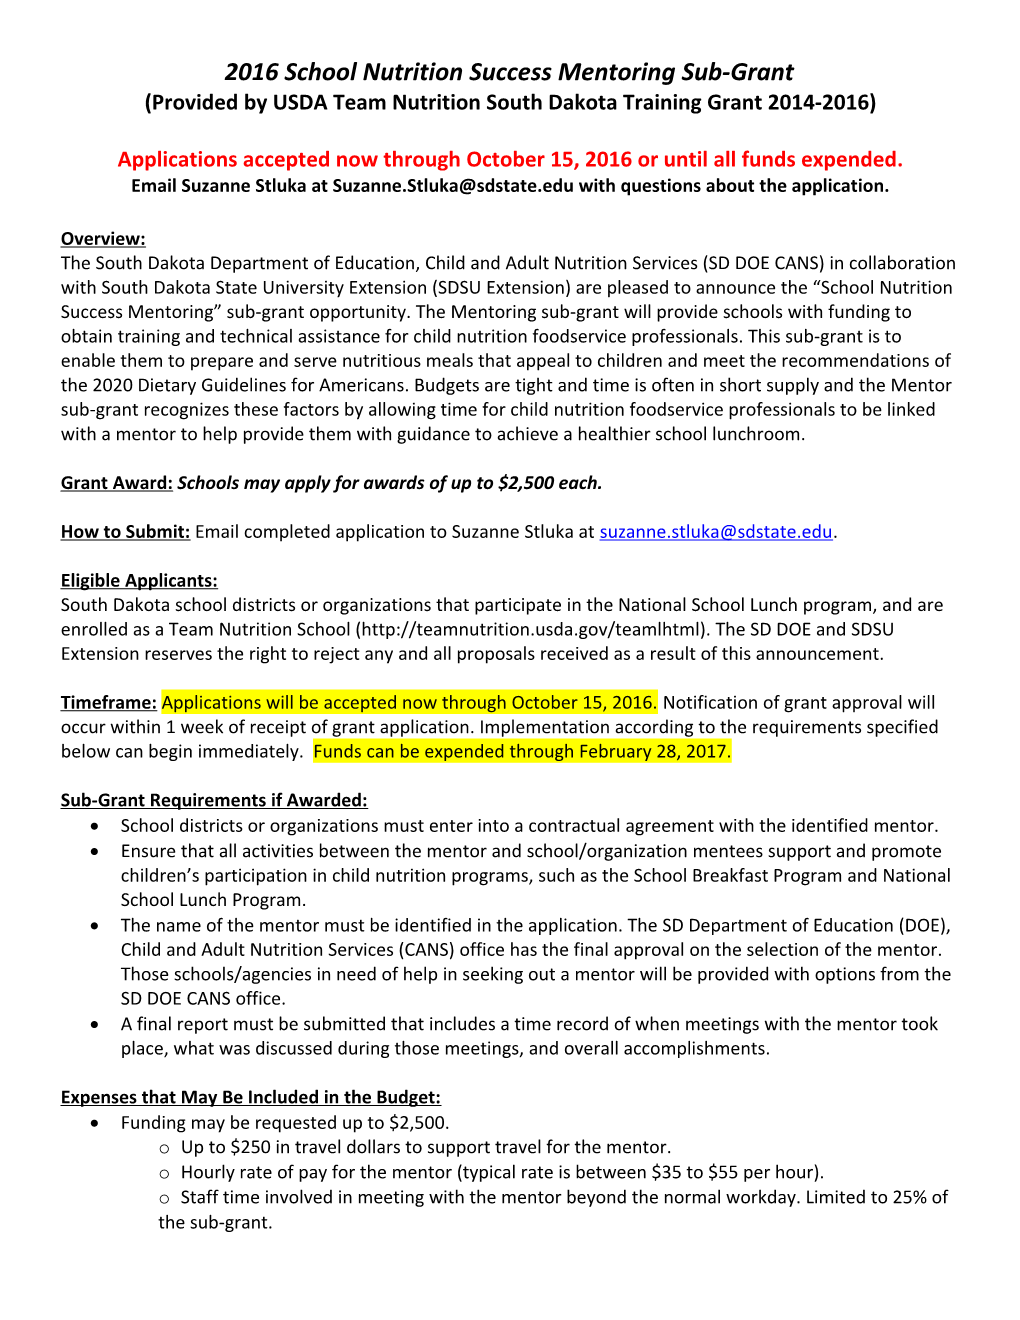 Mini-Grant Funds Are Being Provided by the South Dakota Department of Education Child &